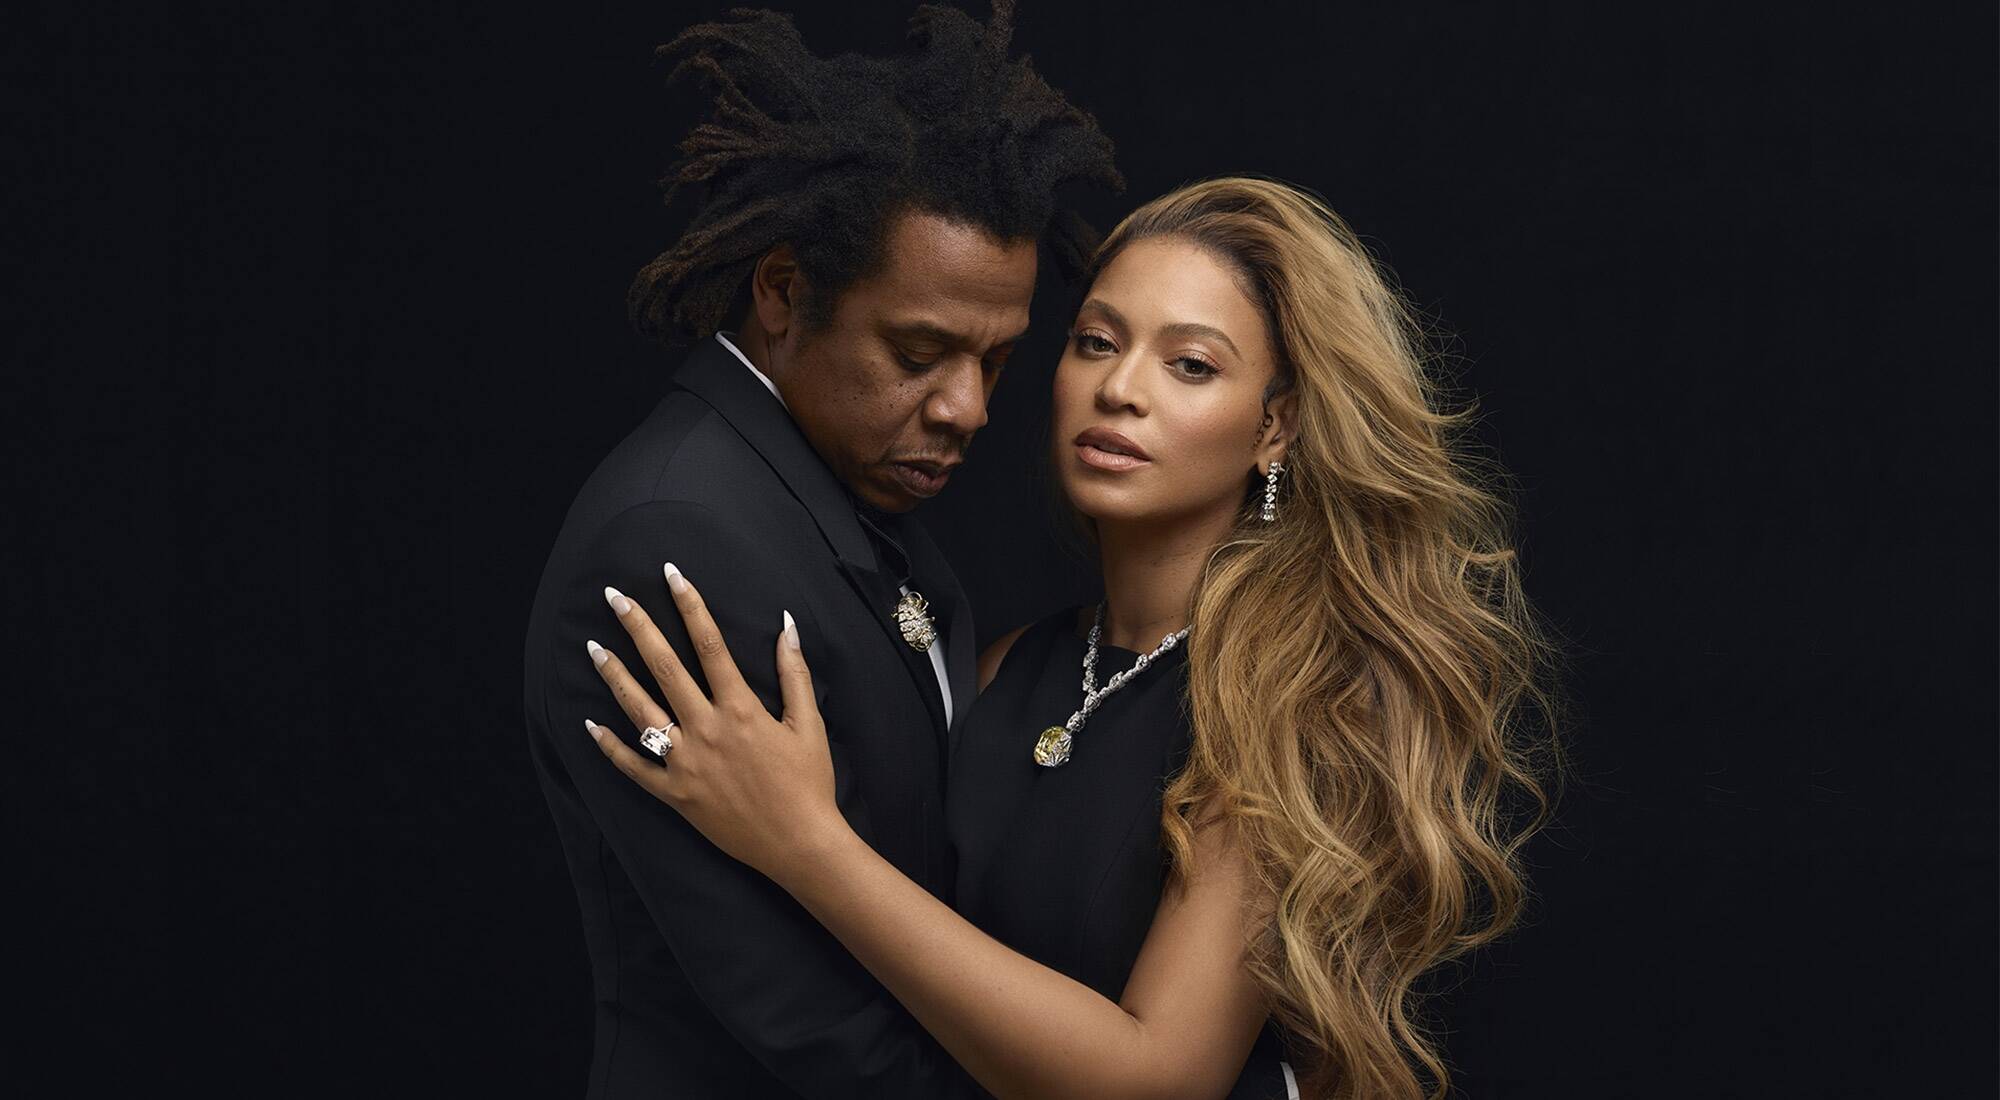 Unraveling all levels of love through the promotional film of tiffany & co featuring beyoncé and jay-z